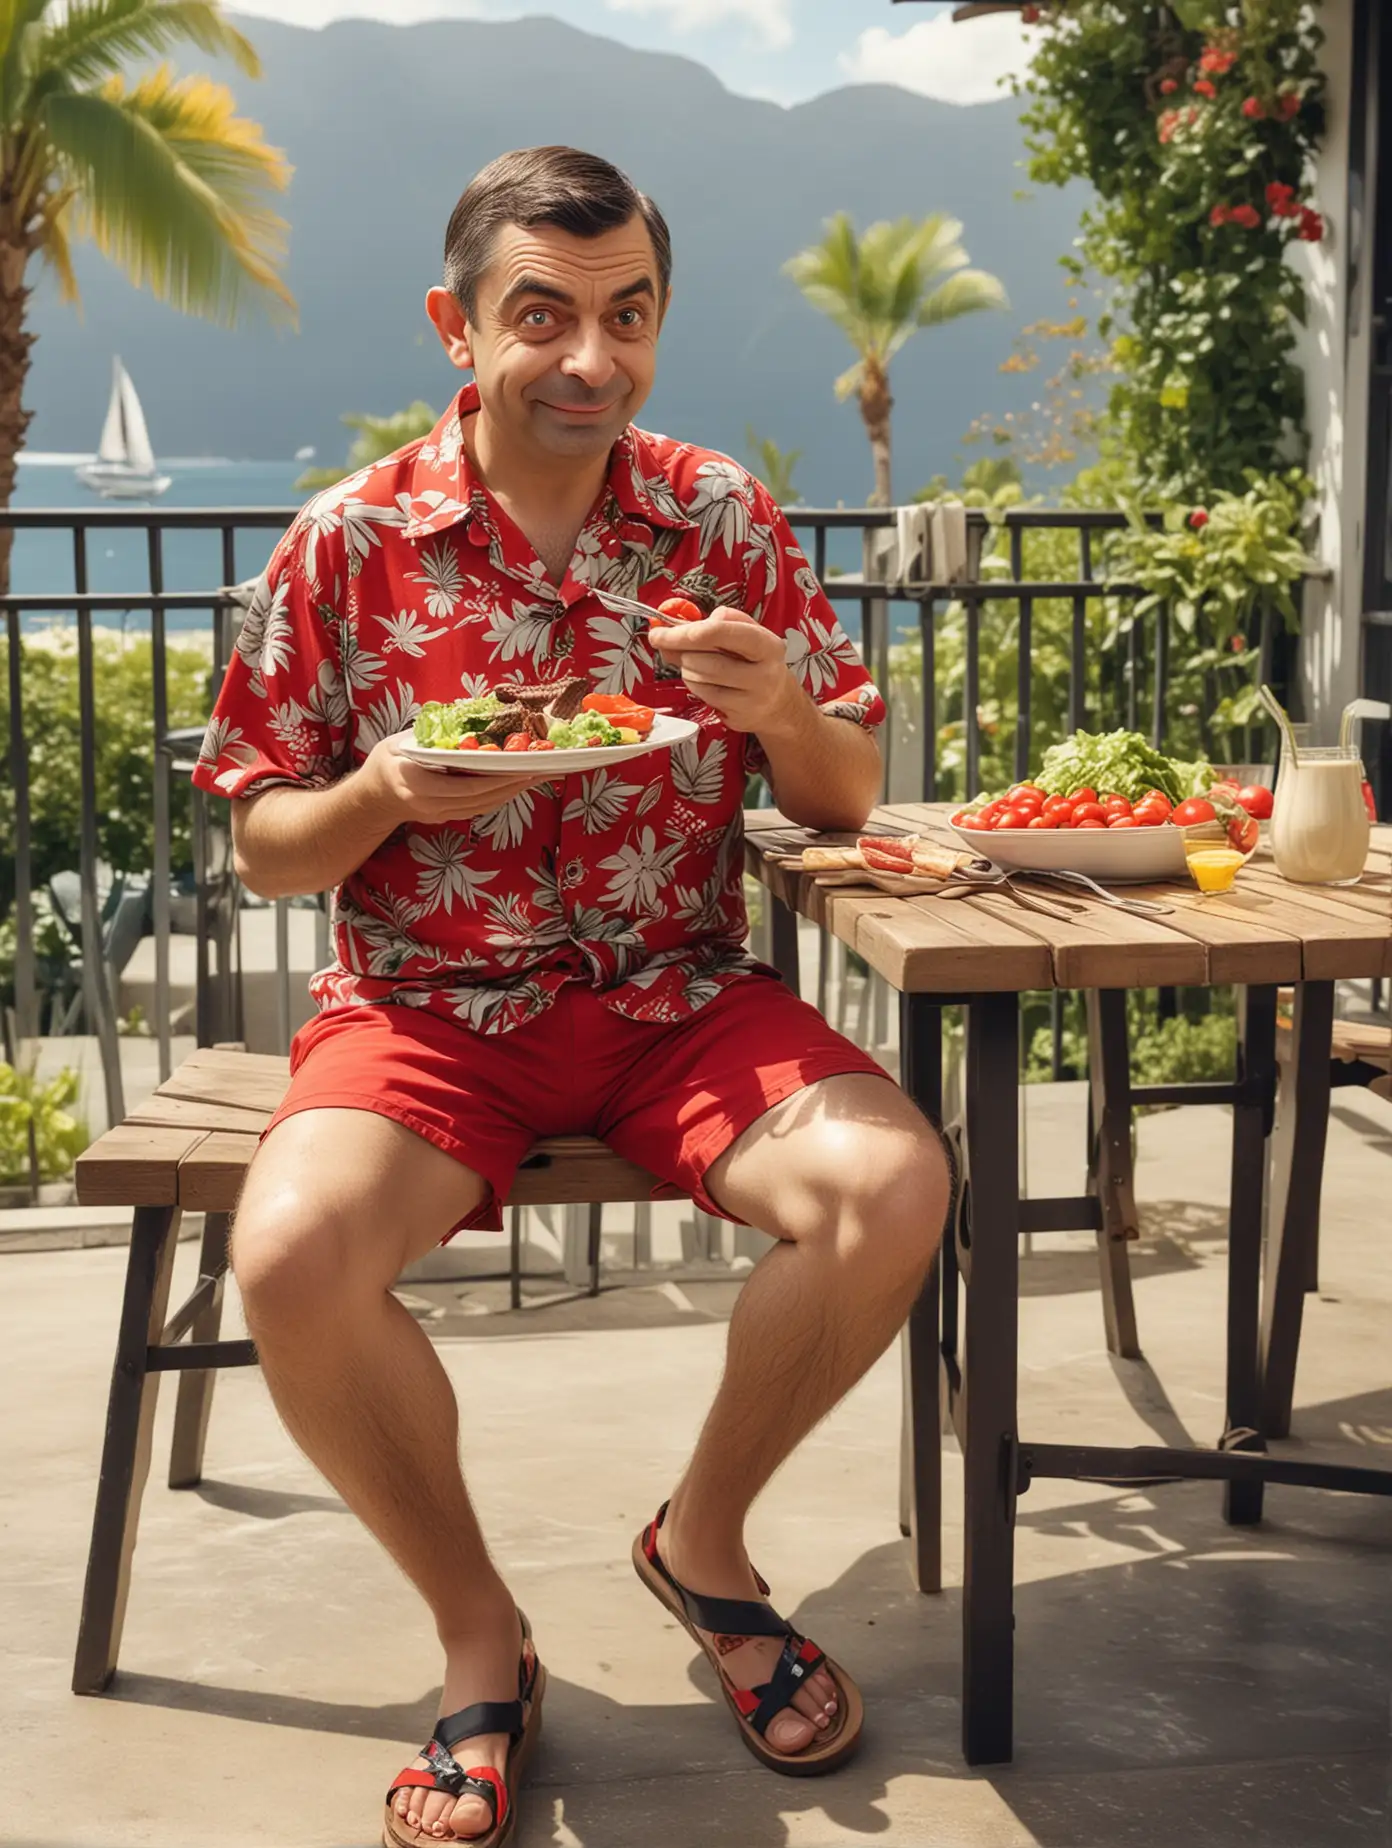 Mr Bean Enjoying Grilled Chops and Salad on Sunny Terrace